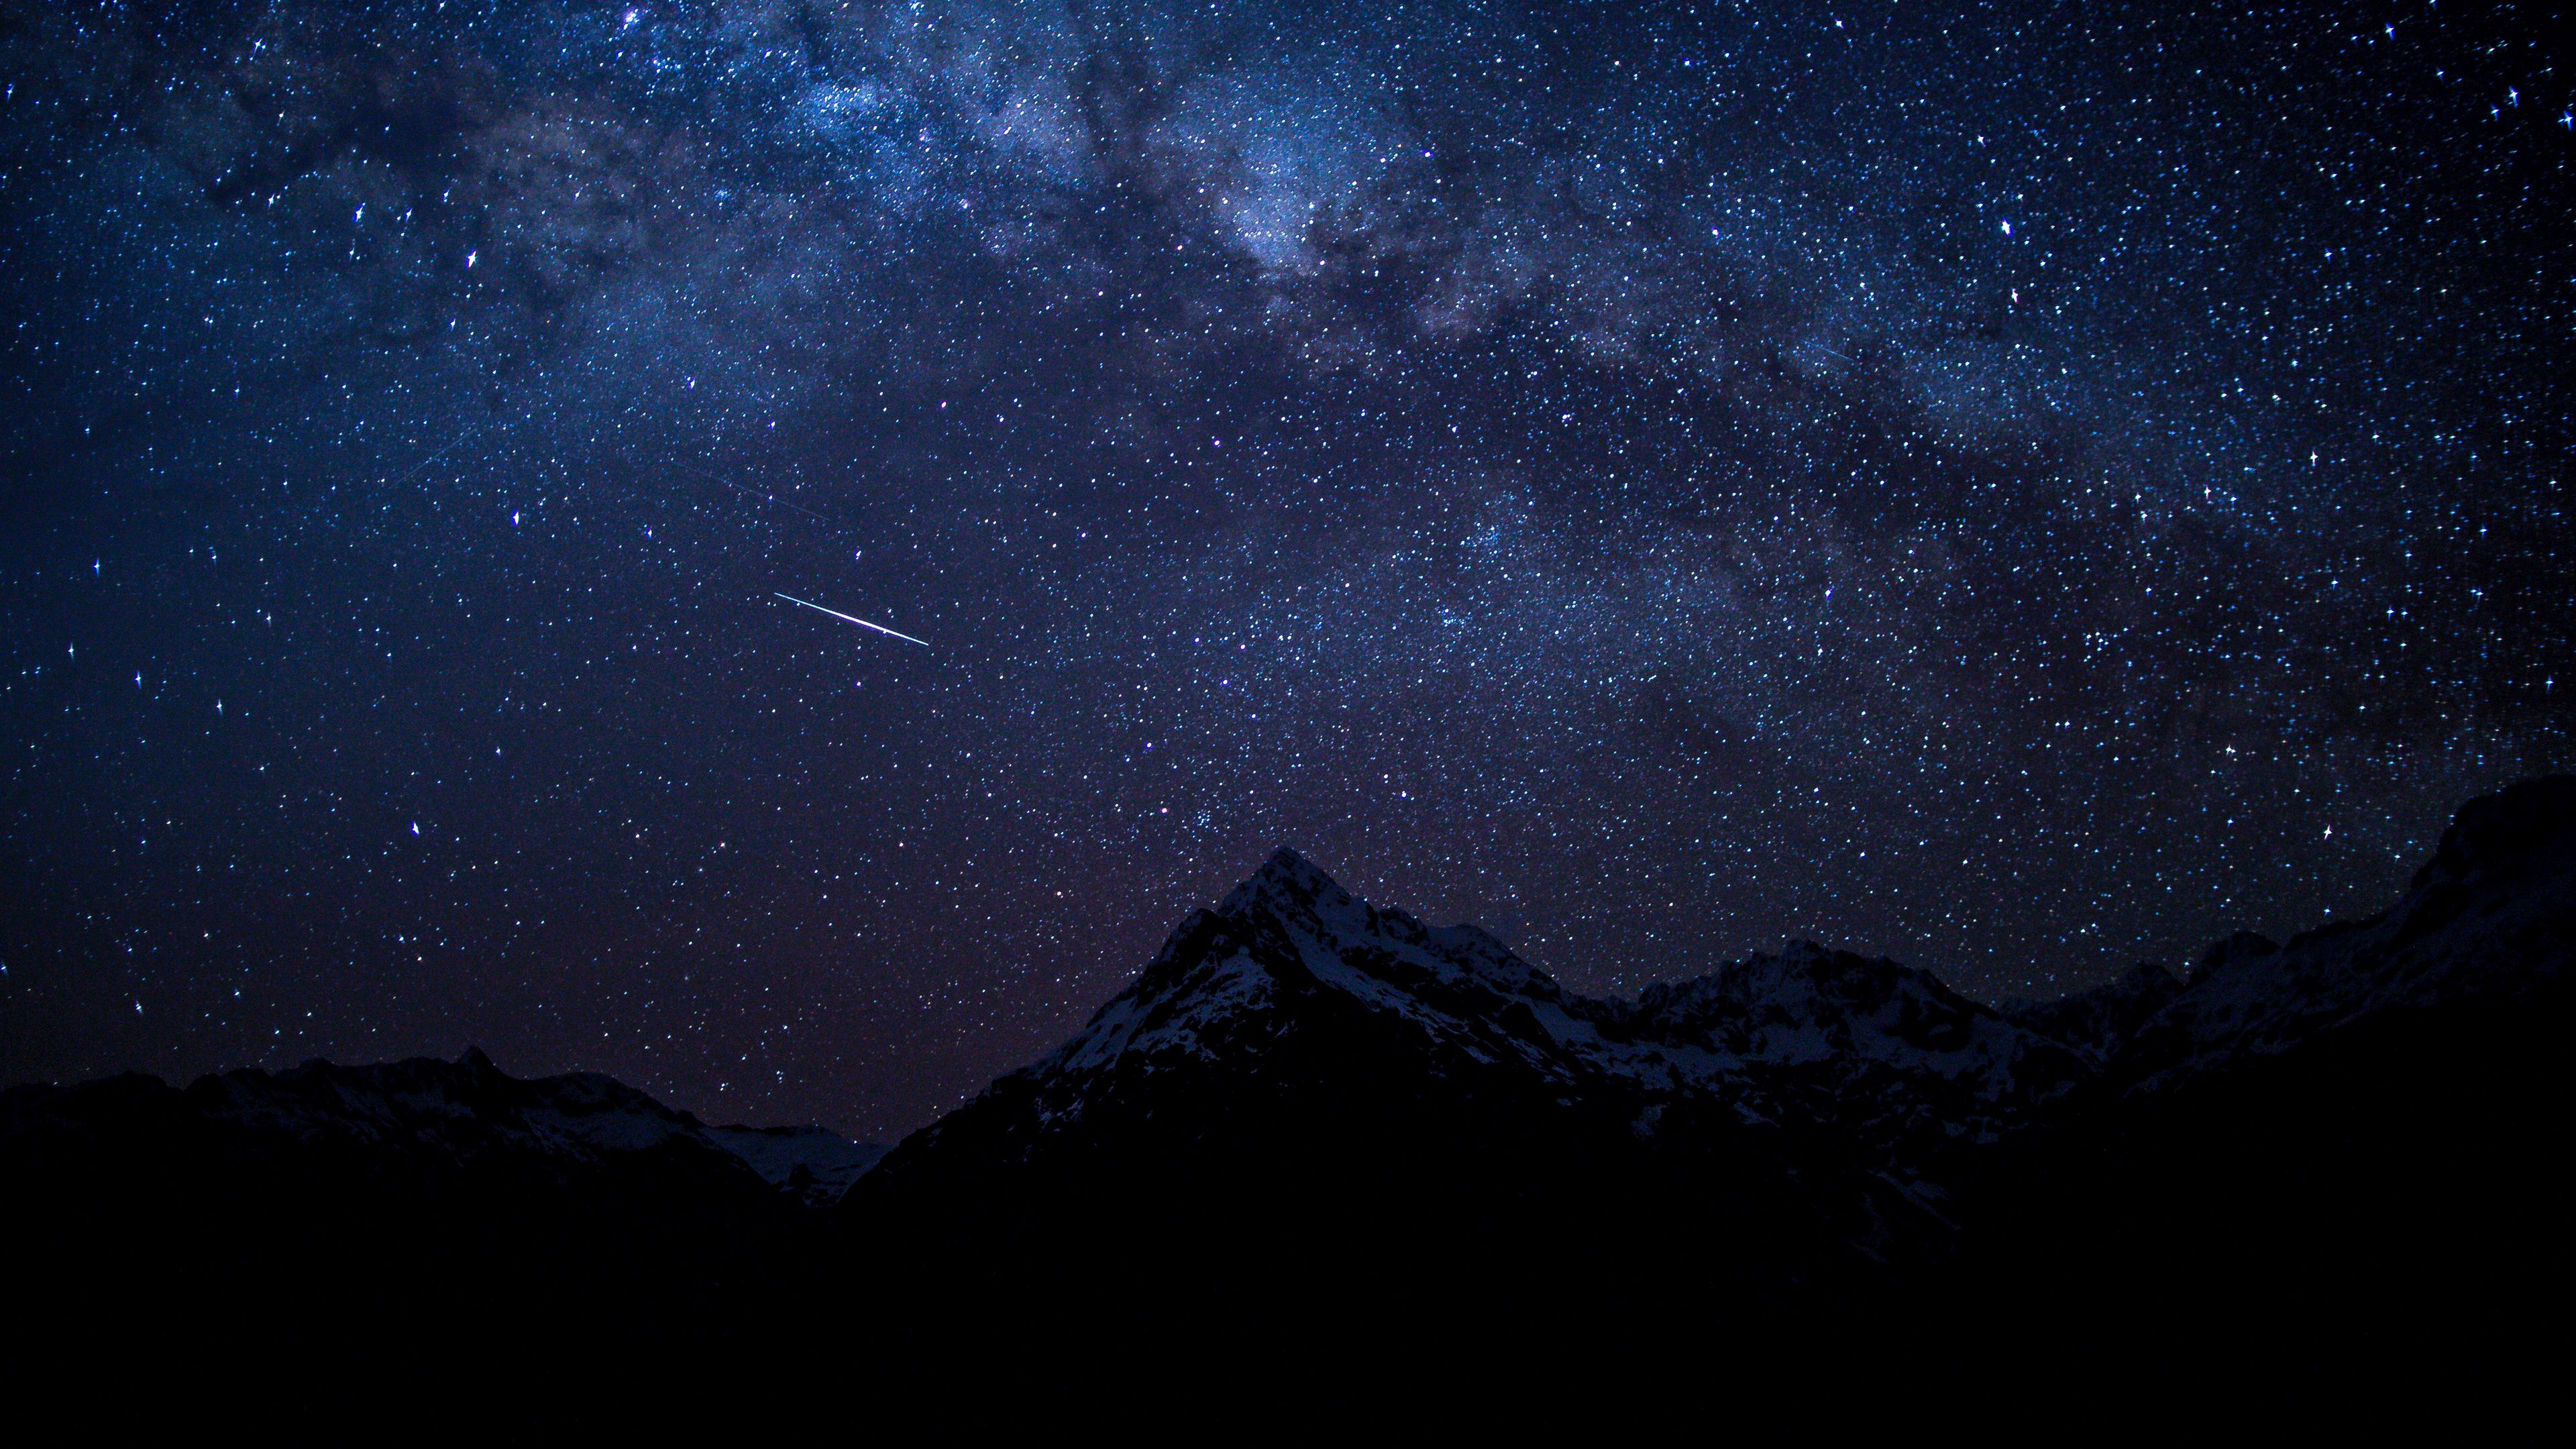 Download wallpaper 3840x2160 starry sky, night, mountains 4k uhd 16:9 hd  background